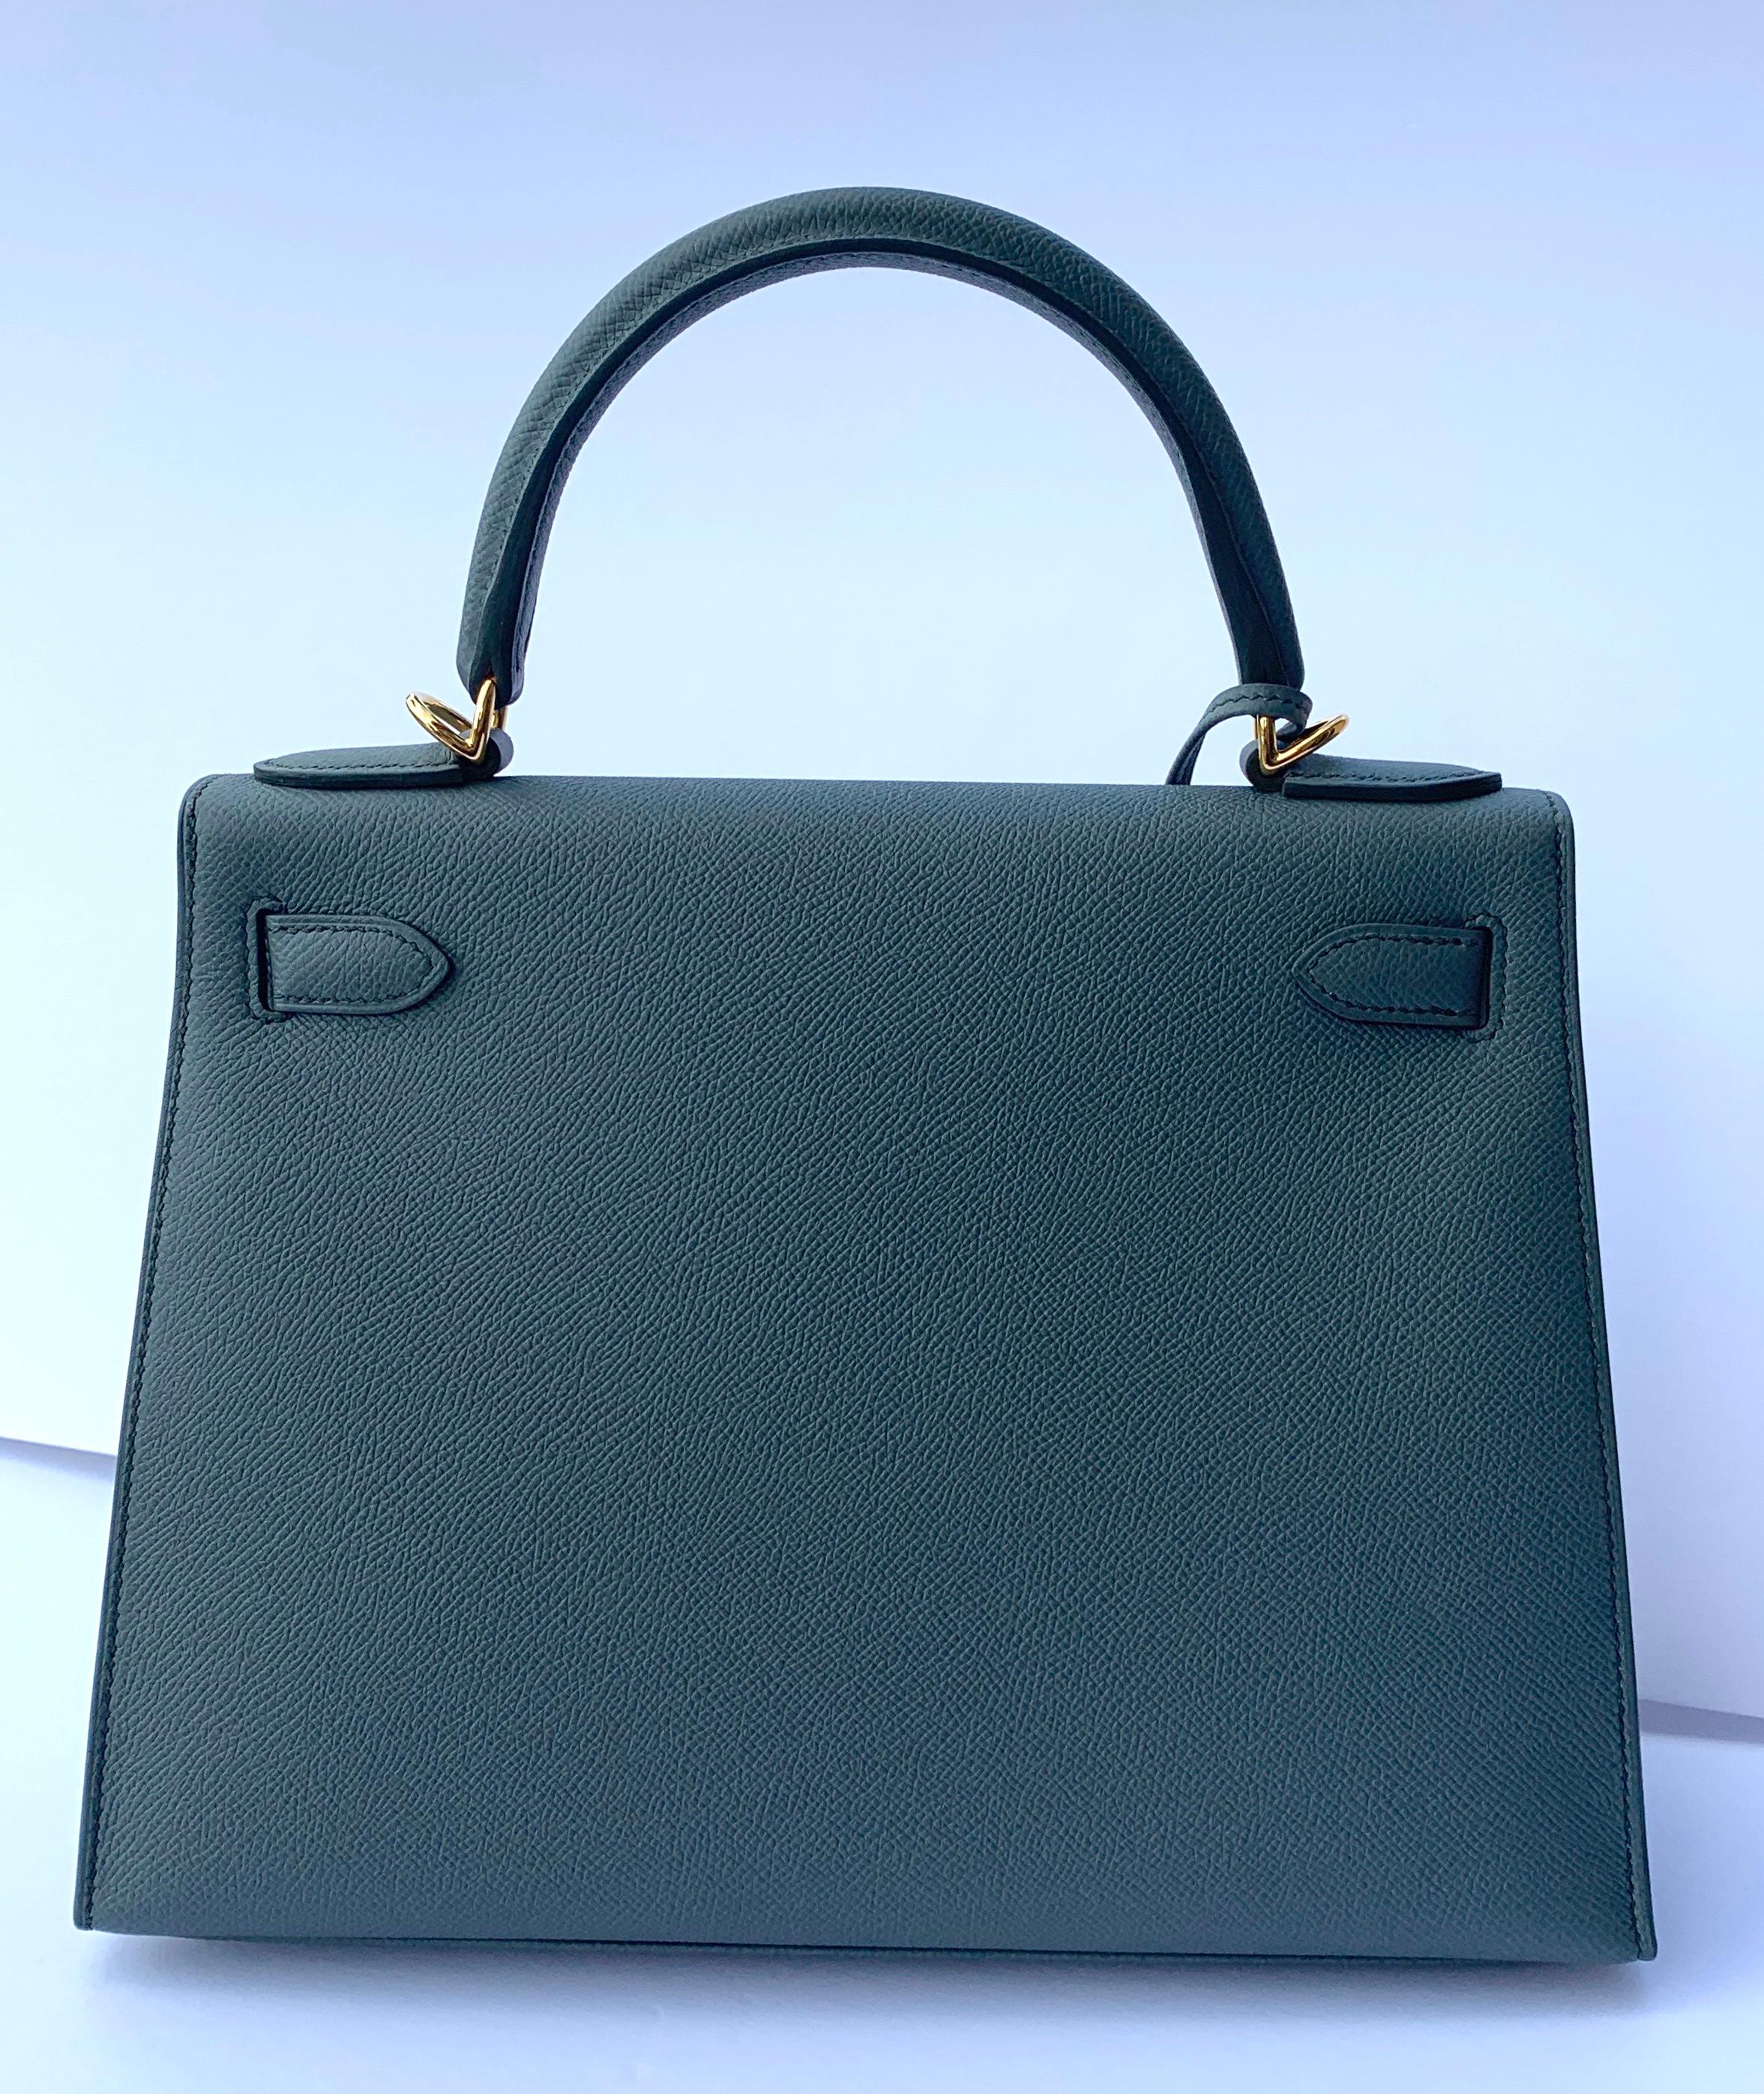 Hermes 28cm Kelly
Hermes Kelly 28cm

A great new neutral color!
Brand new color from Hermes , Vert Amande
Epsom sellier 
The combination is tres chic!

Gold Hardware

Perfect neutral color

Hermes Box, Dustcover, Ribbon, Lock and Keys, Clochette,